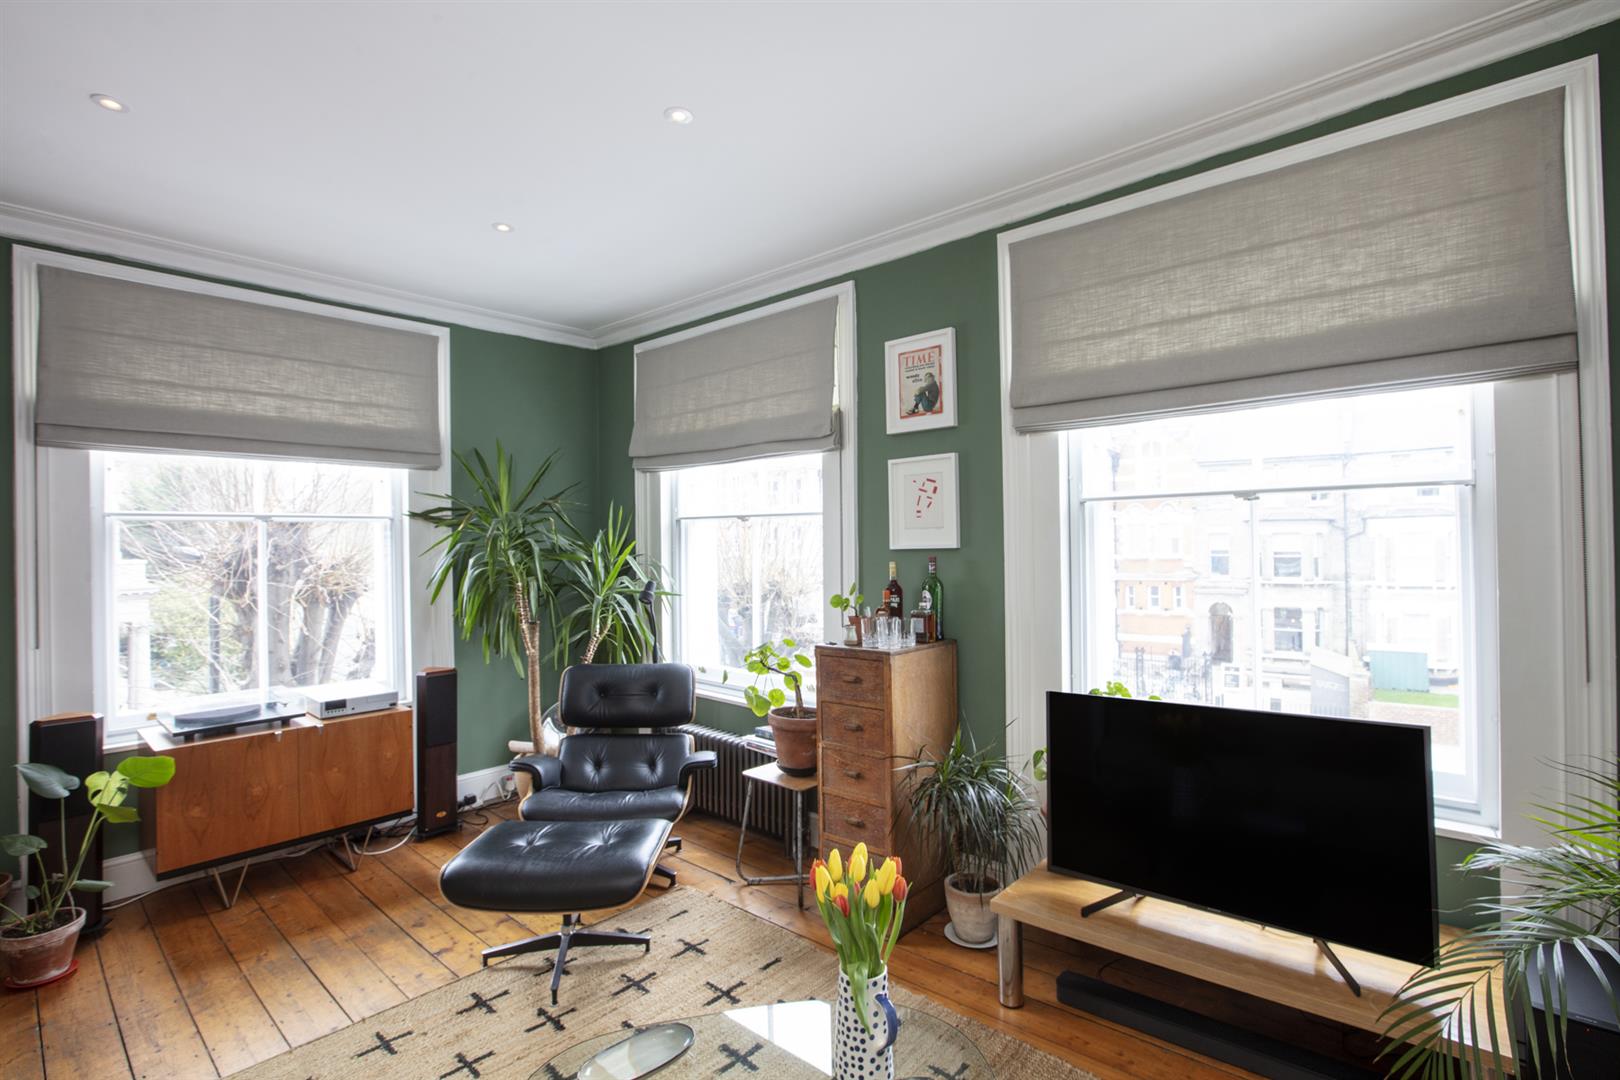 Flat - Conversion Sold in Peckham Road, Camberwell, SE5 1049 view4